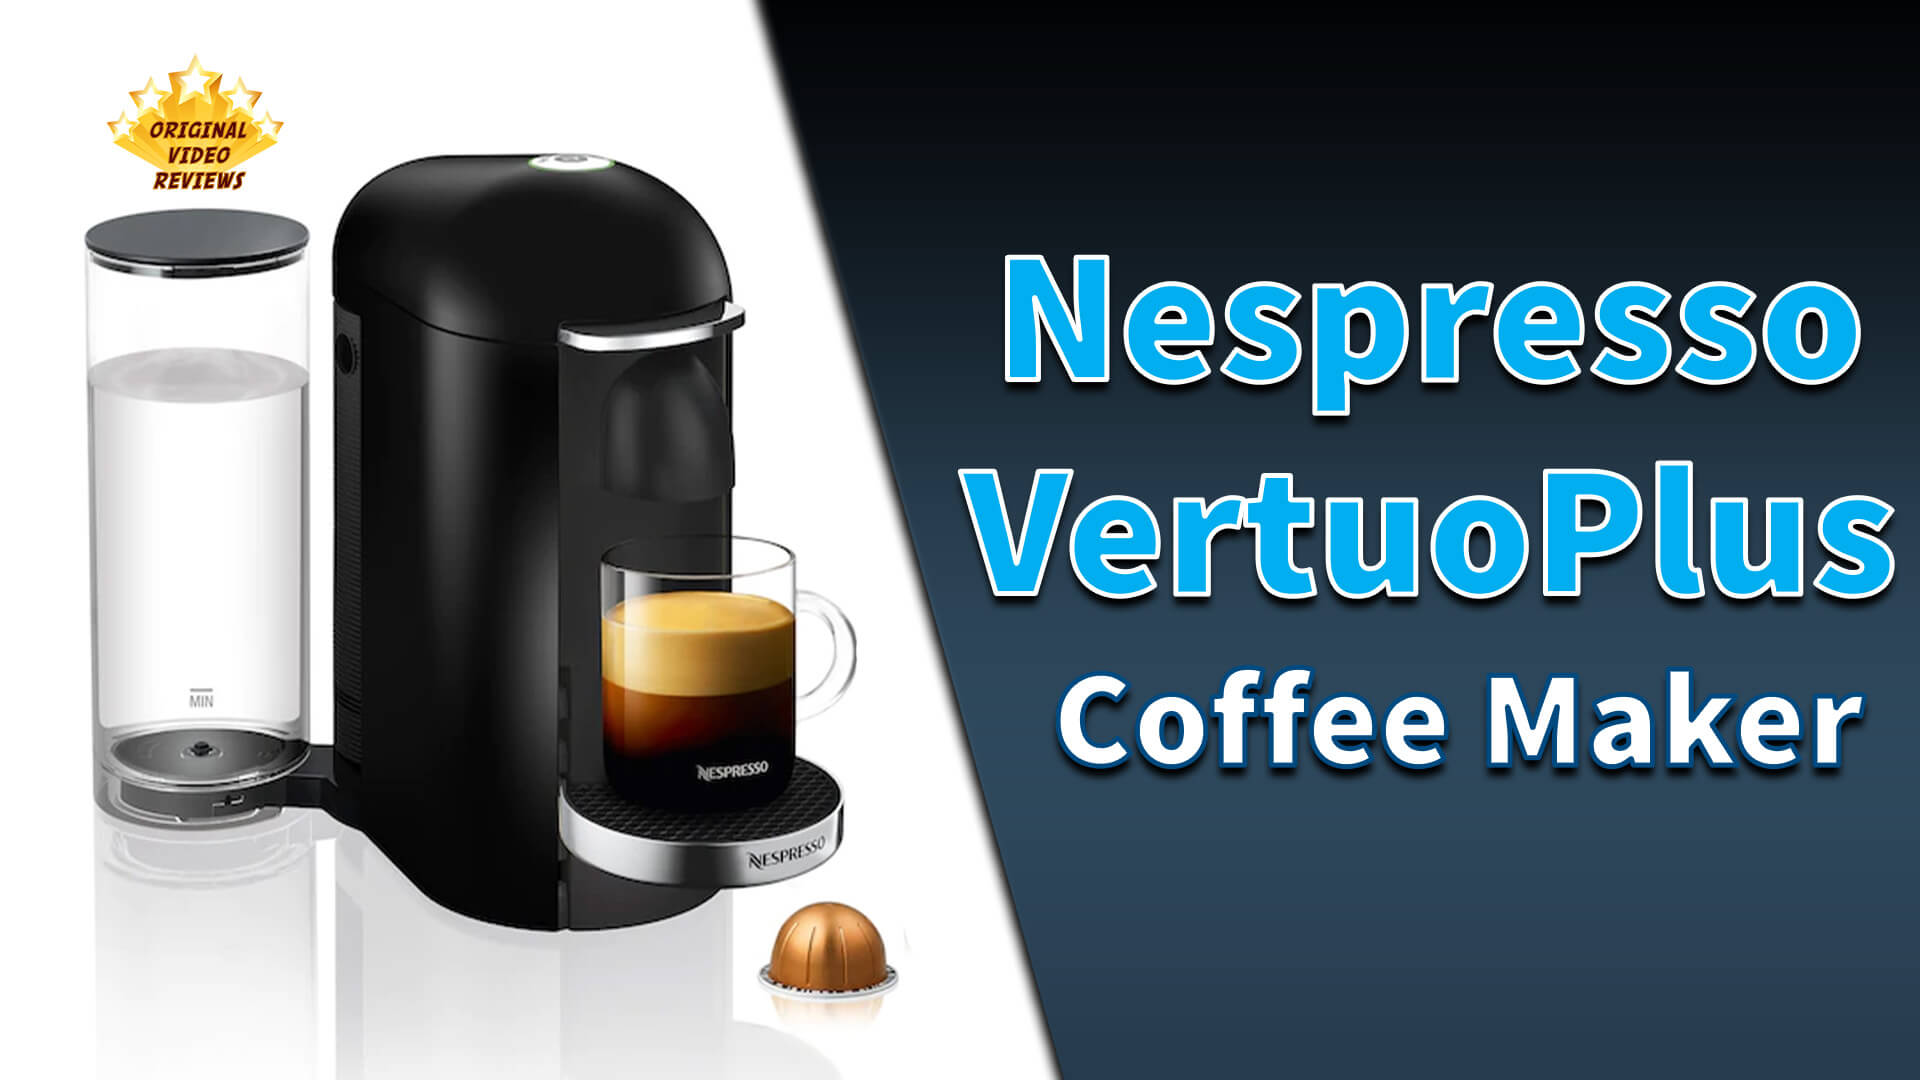 Nespresso Vertuo Plus Coffee Maker Review (Thumbnail)